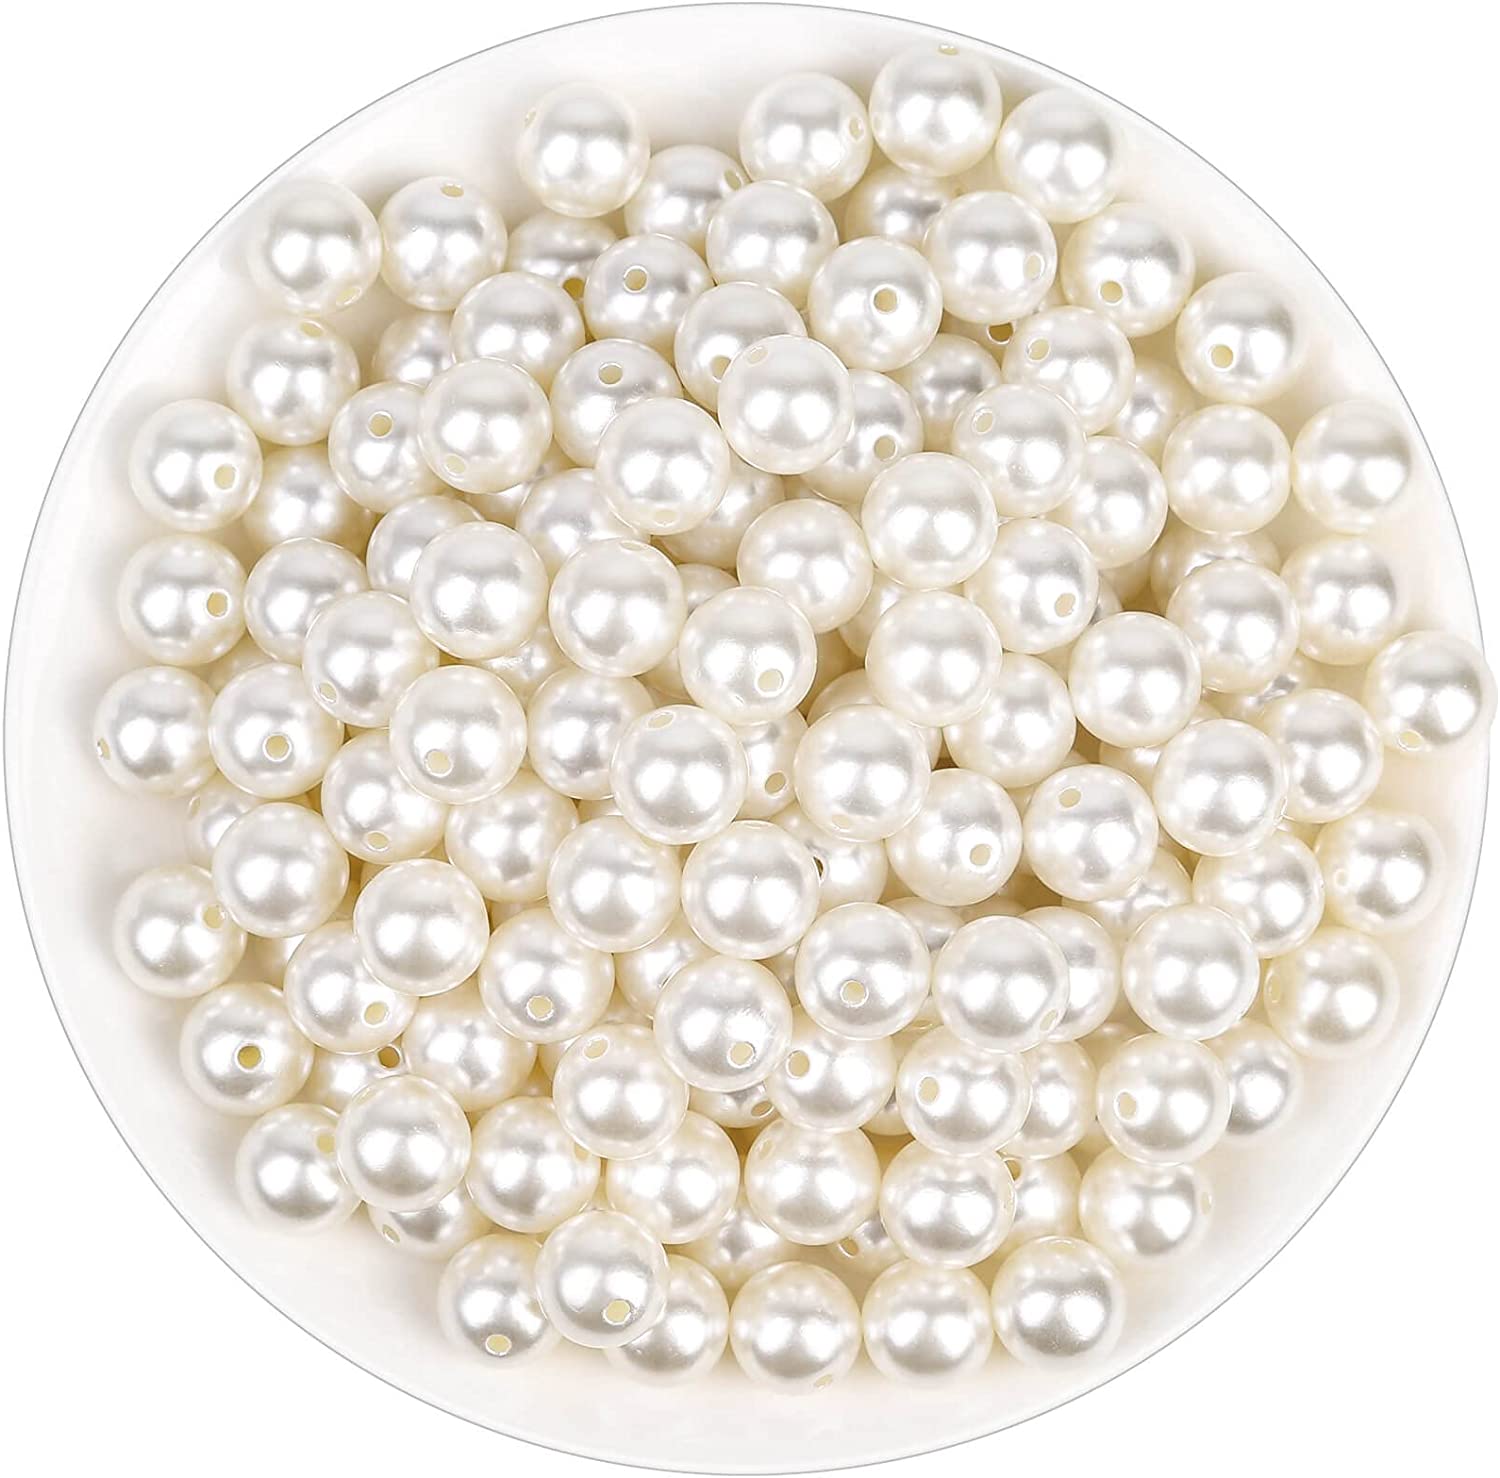 Flat Back Pearl Beads 690pcs 6 Sizes Beige Craft Pearl Cabochons Half  Pearls Loose Beads Gem 